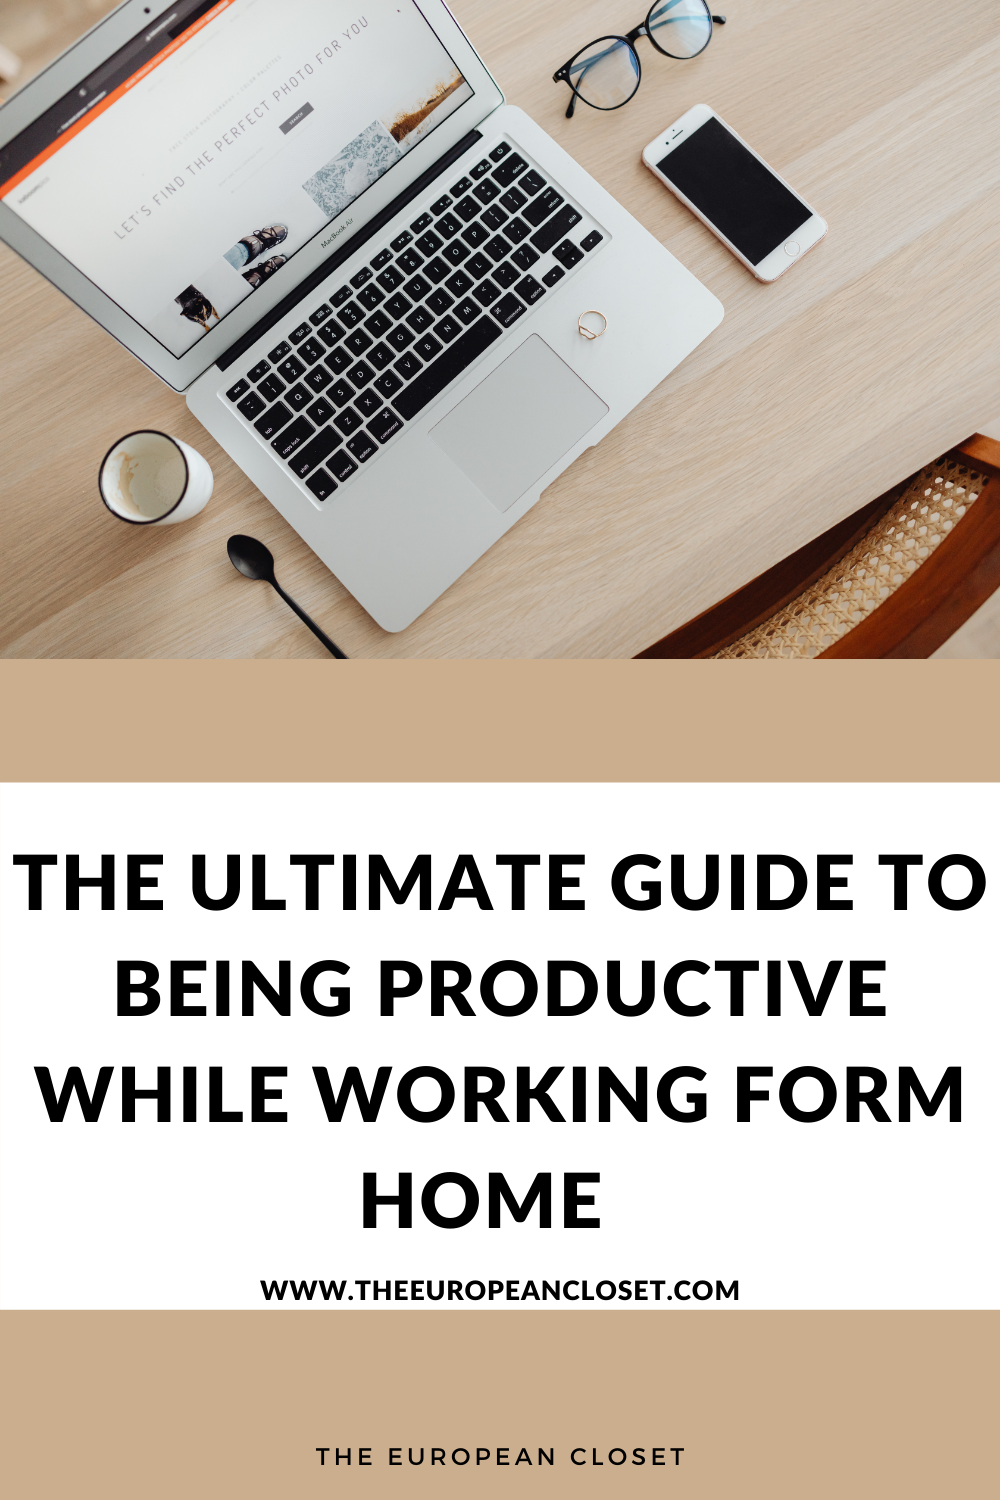 Here are my top 7 tips on how to work from home productively. Follow them and you'll be a productivity machine in no time.